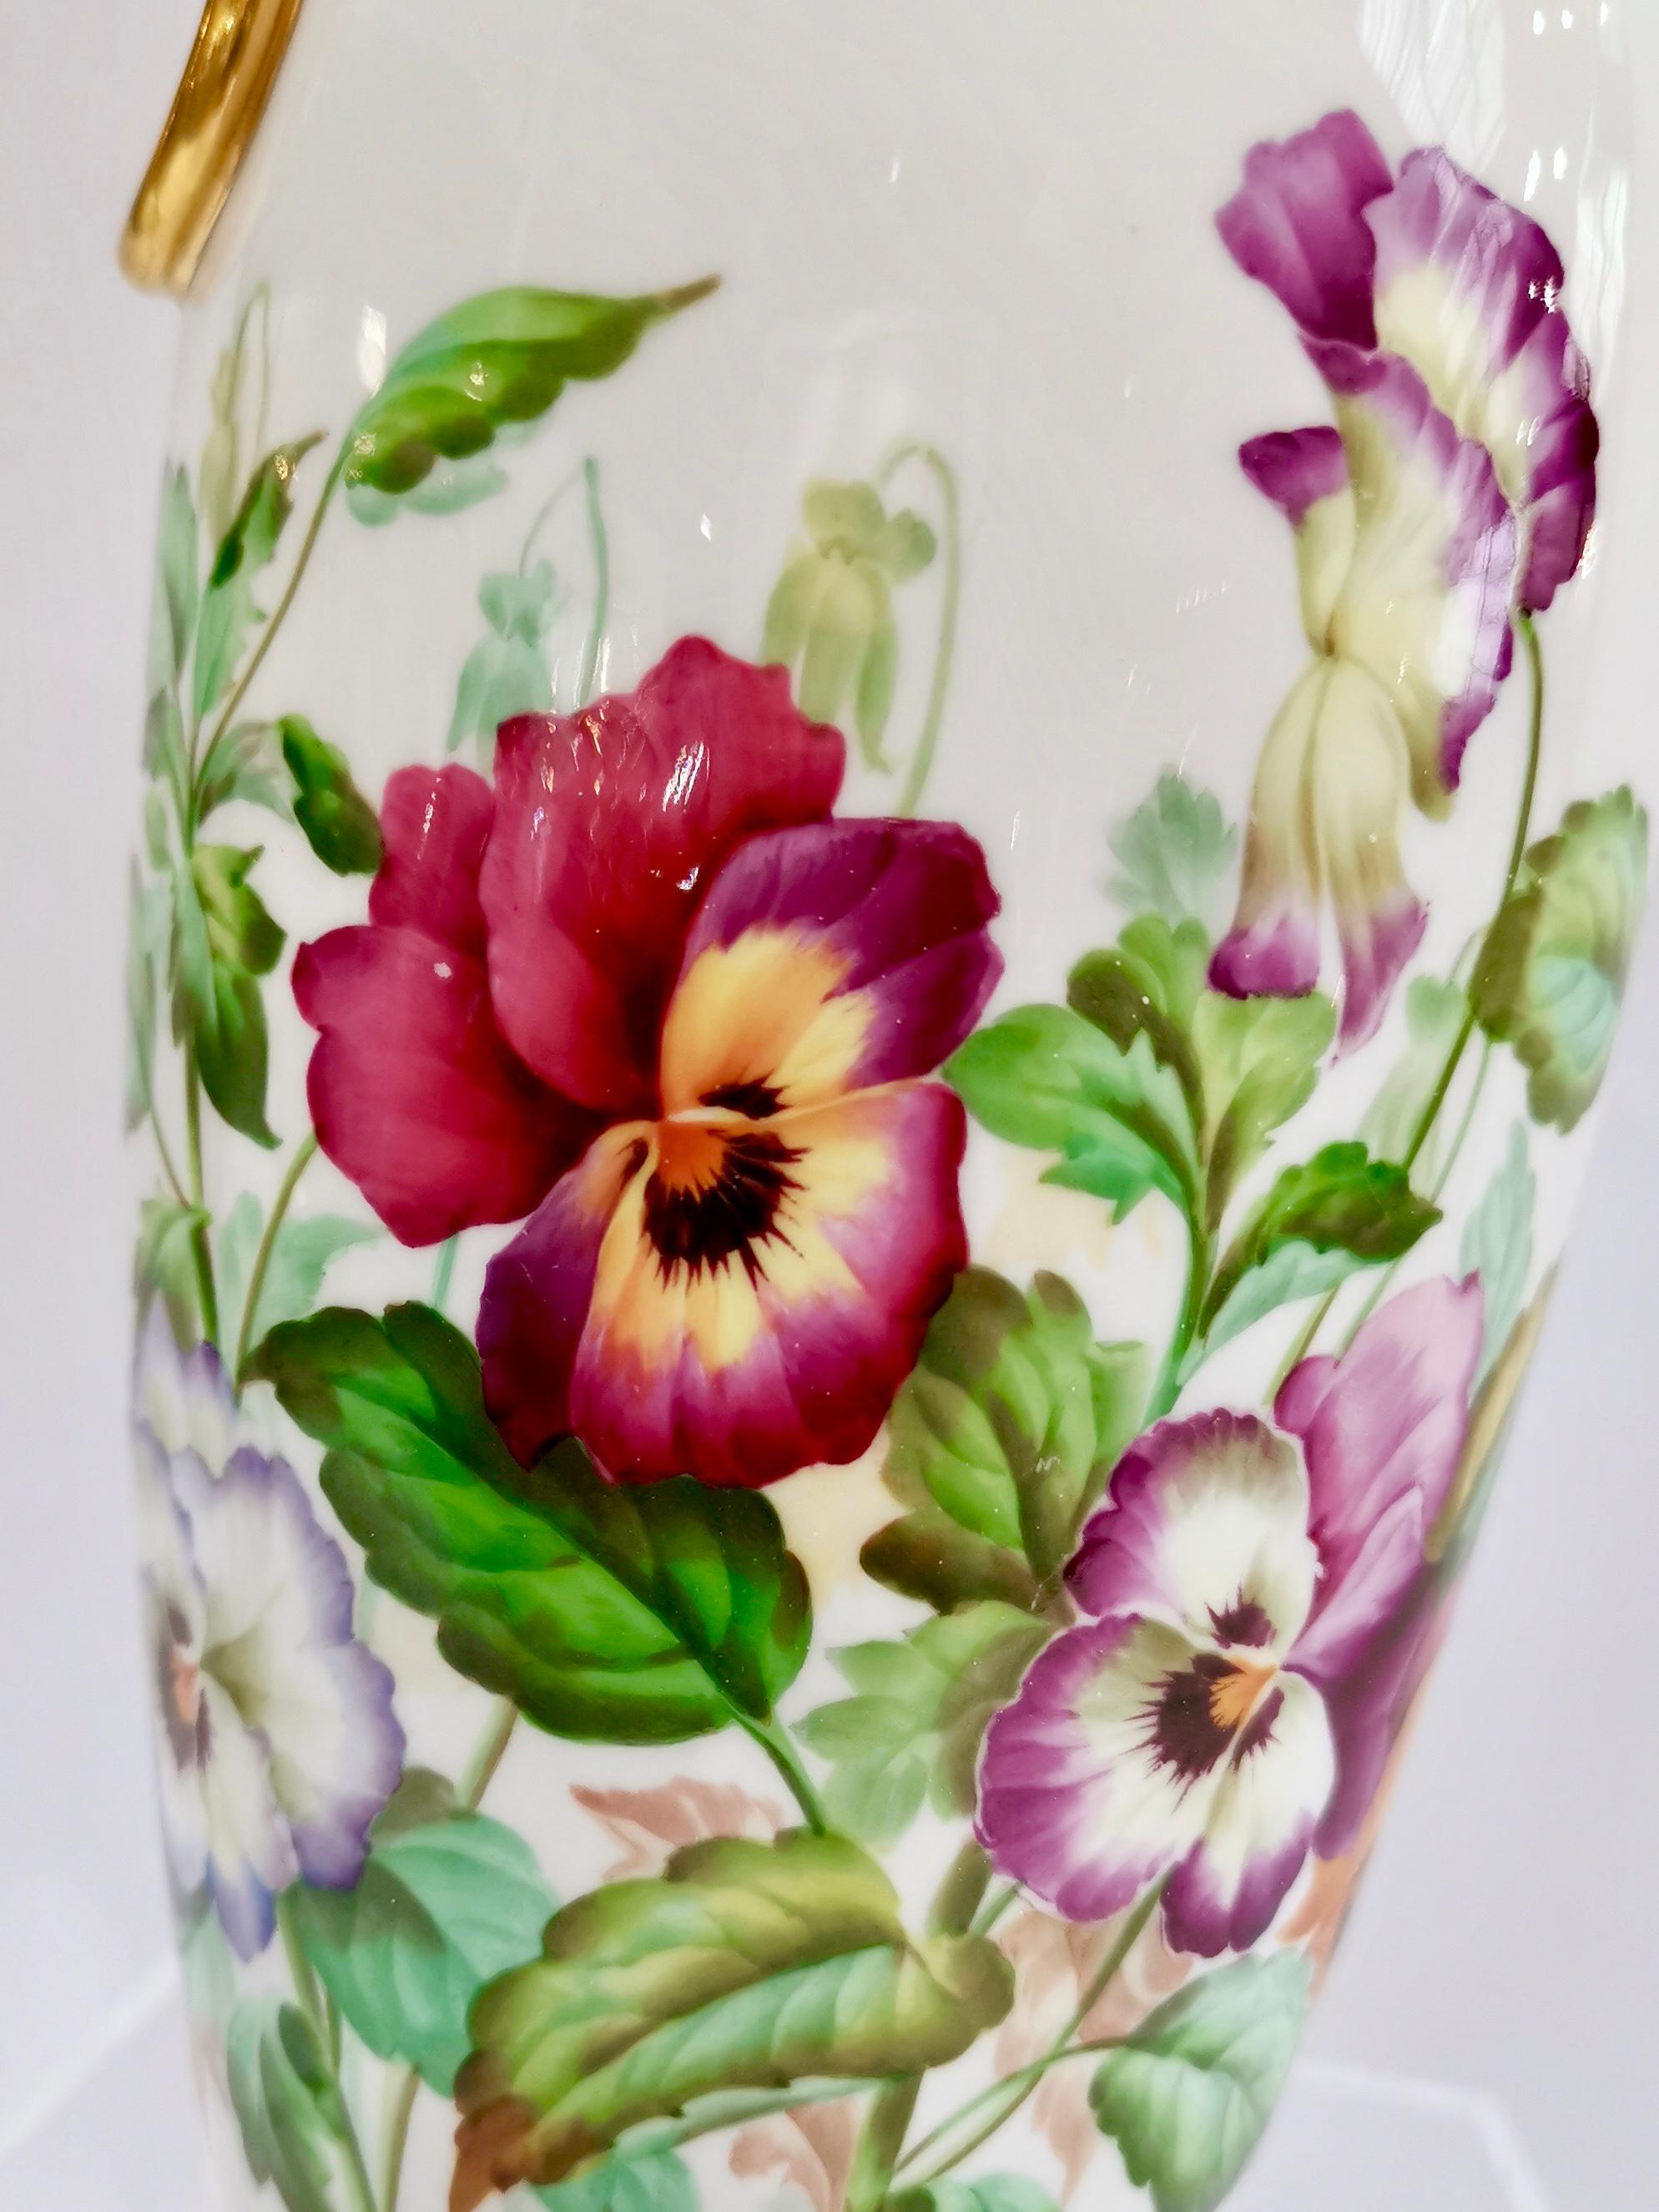 English Minton Pair of Porcelain Vases, Pansies Painted by Jesse Smith, Victorian, 1853